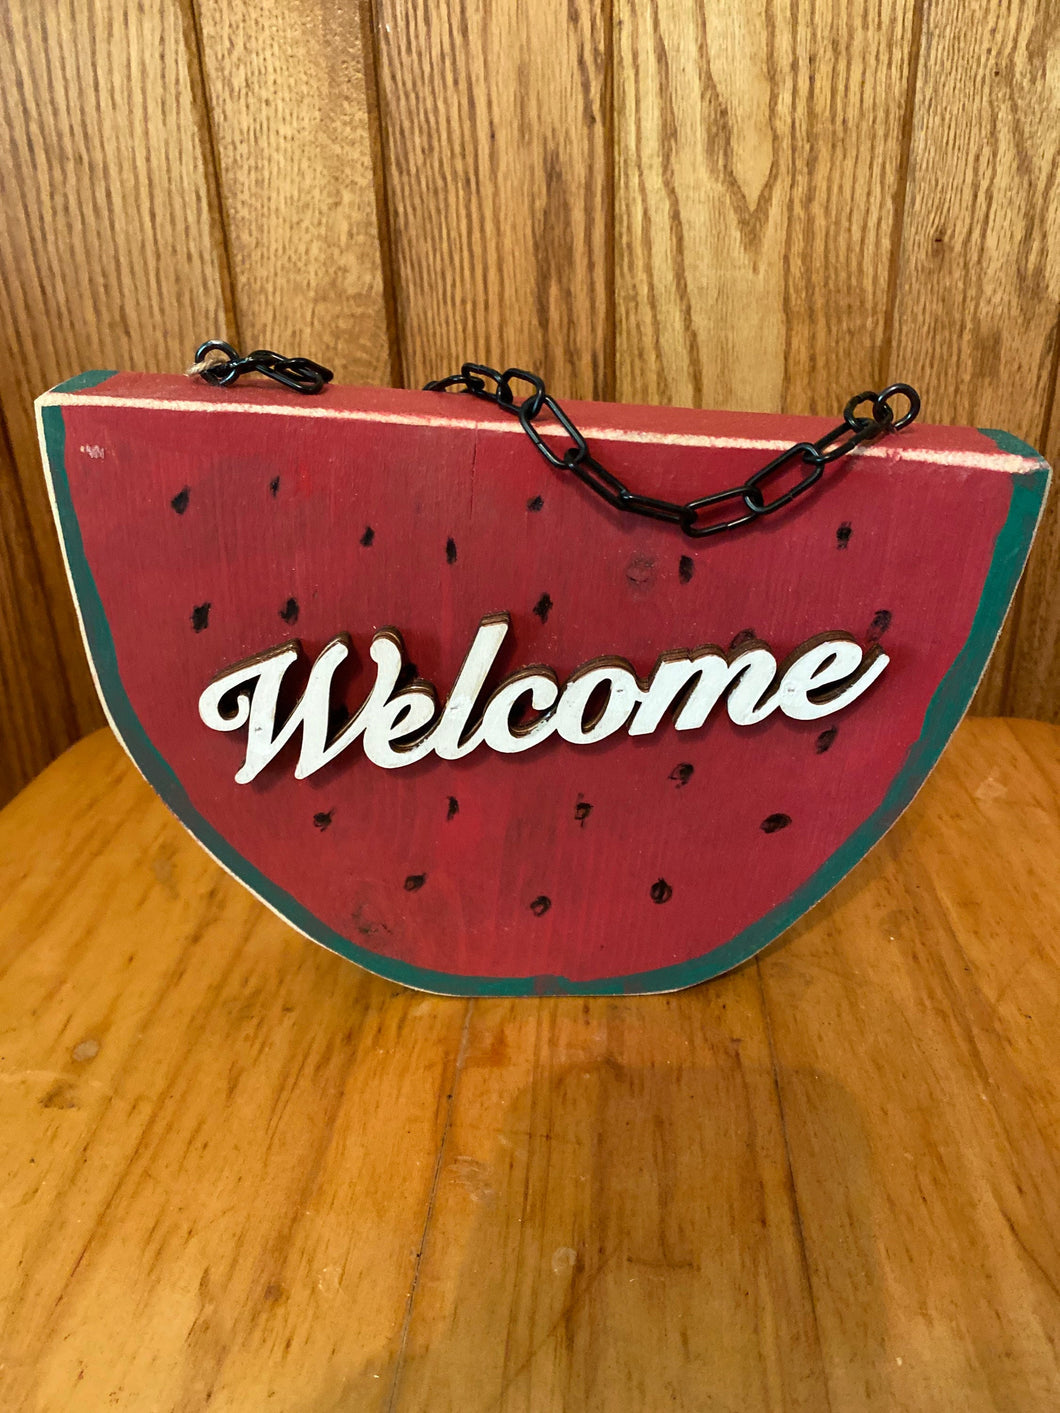 Hanging Handcrafted Rustic Wood Watermelon Slice “Welcome”.